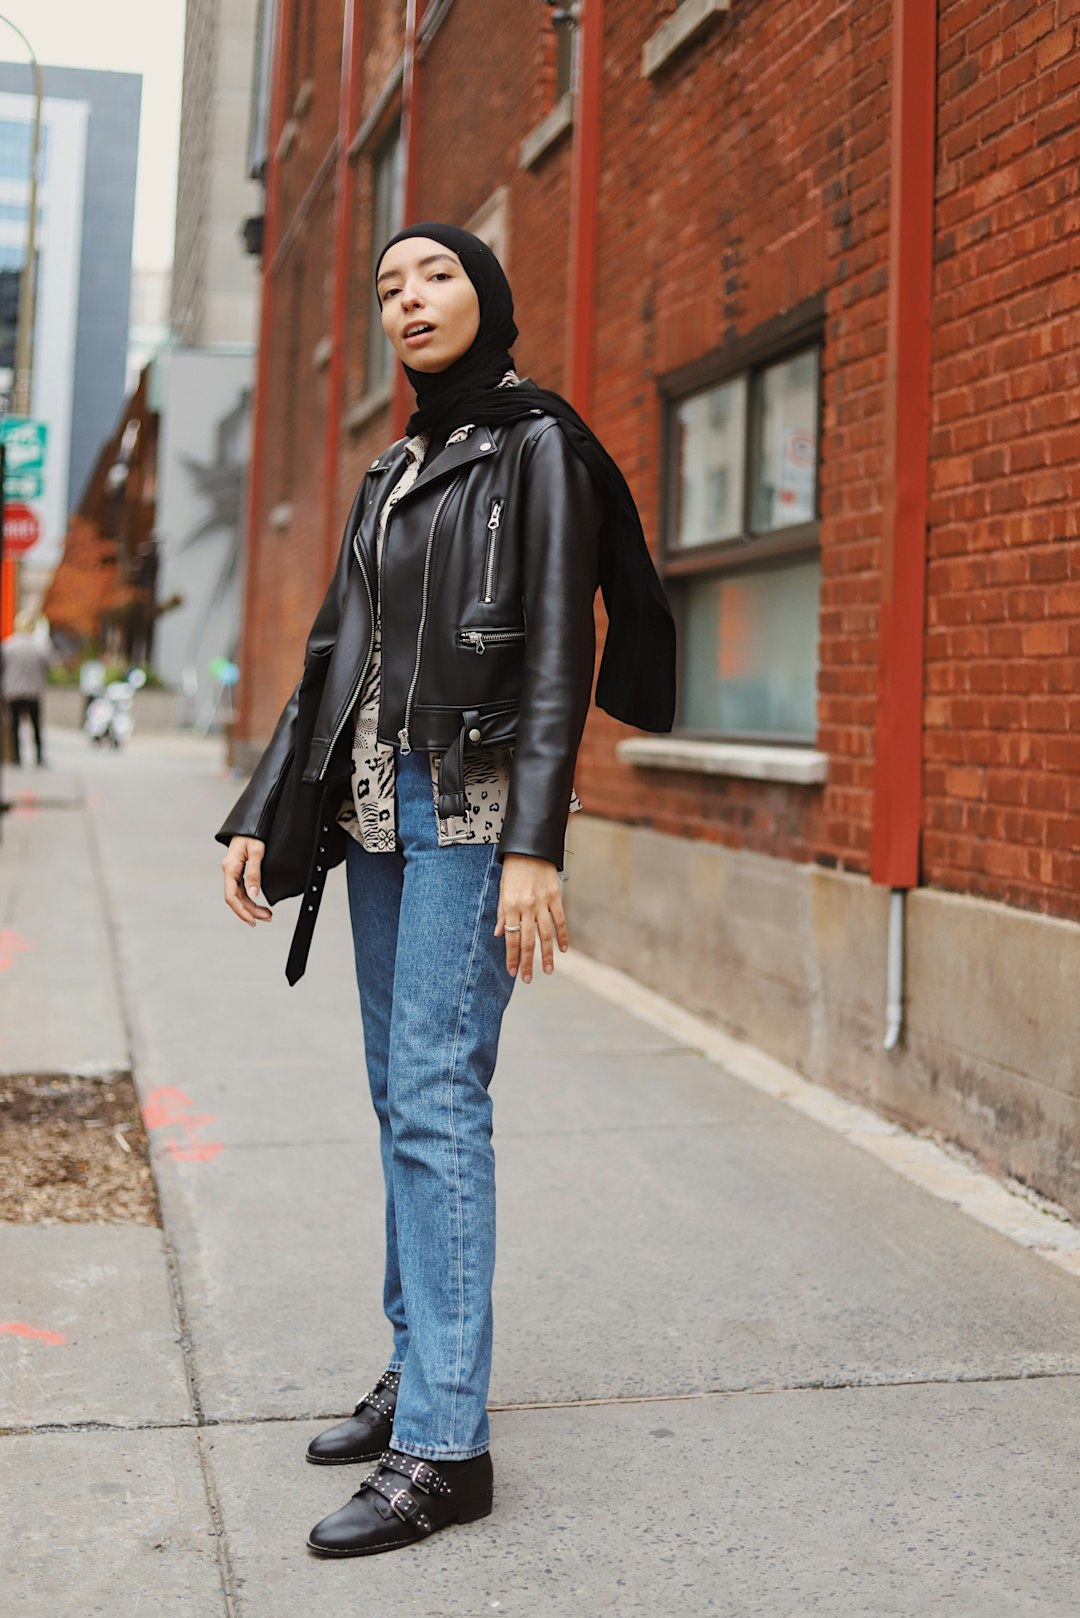 woman in black leather jacket and blue denim jeans standing on sidewalk during daytime